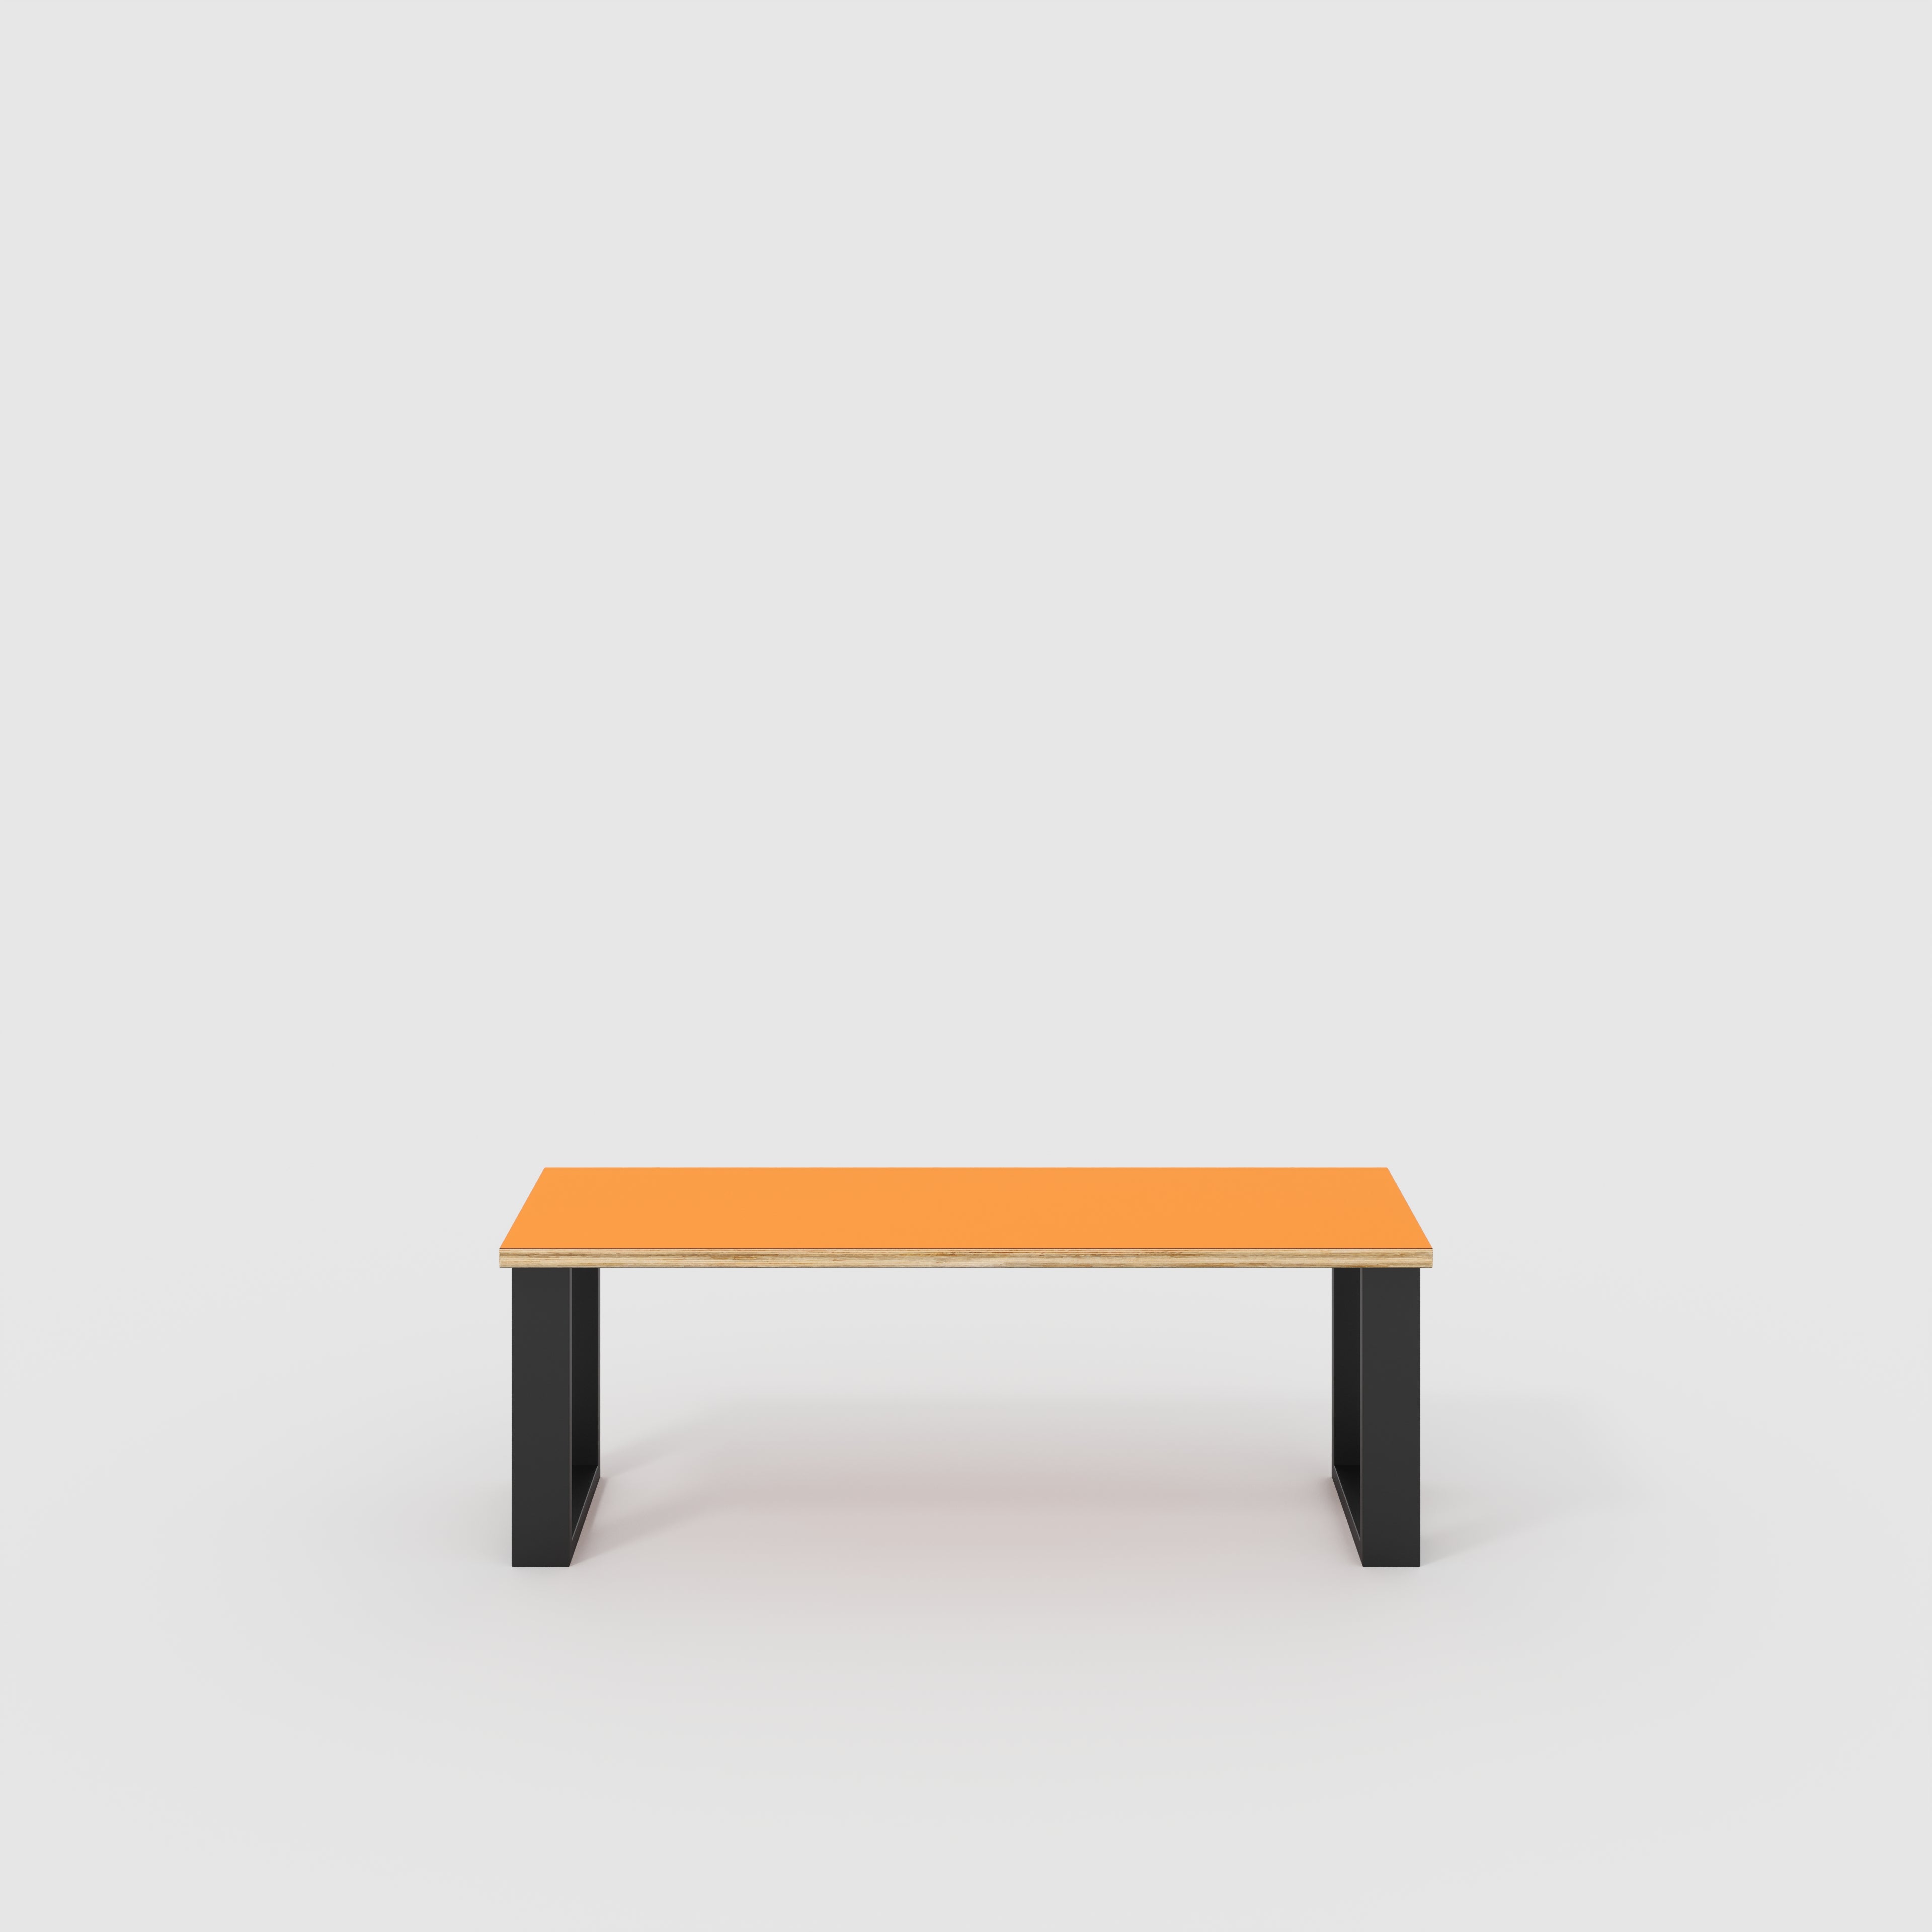 Bench Seat with Black Industrial Legs - Formica Levante Orange - 1200(w) x 400(d)